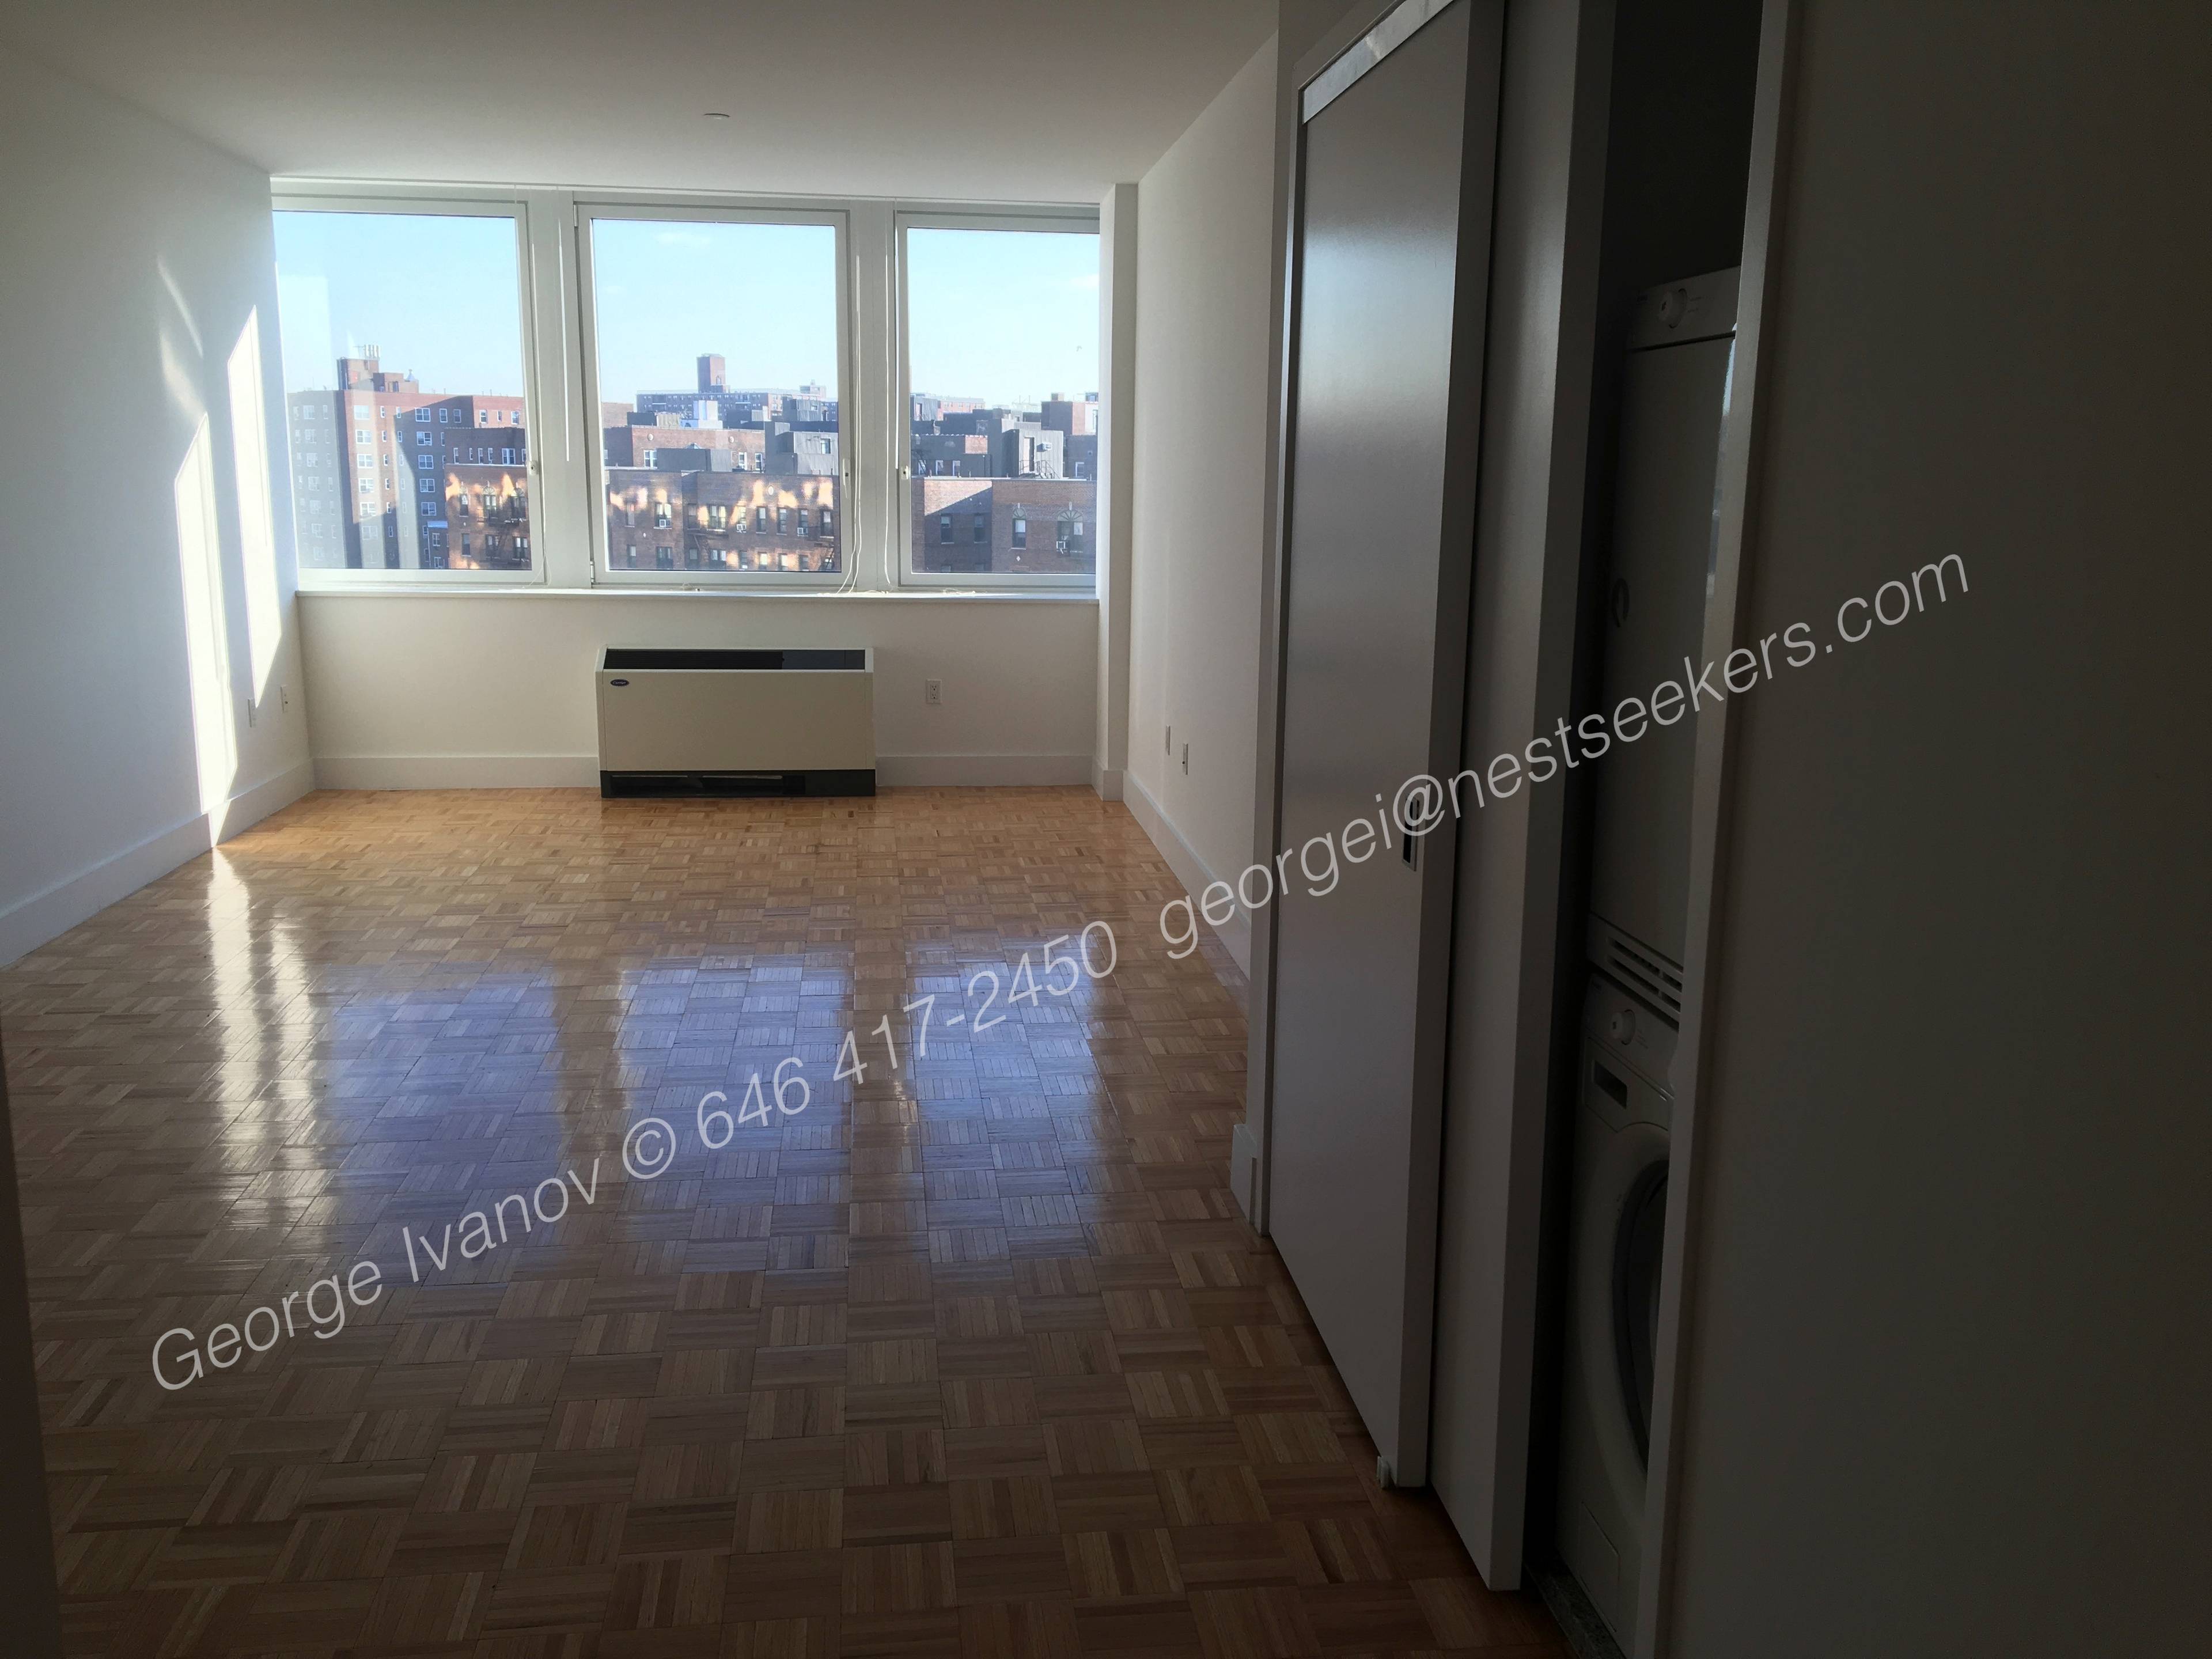 ★★★ ★  ULTRA LUXURY 2Bed ( 1 BED + Home office / 2Bath  Apartments .  Condo Style Finishes .  Washer & Dryer in UNIT.24Hr Doorman, SPECTACULAR AMENETIES. 20 min to MIdtown Manhattan